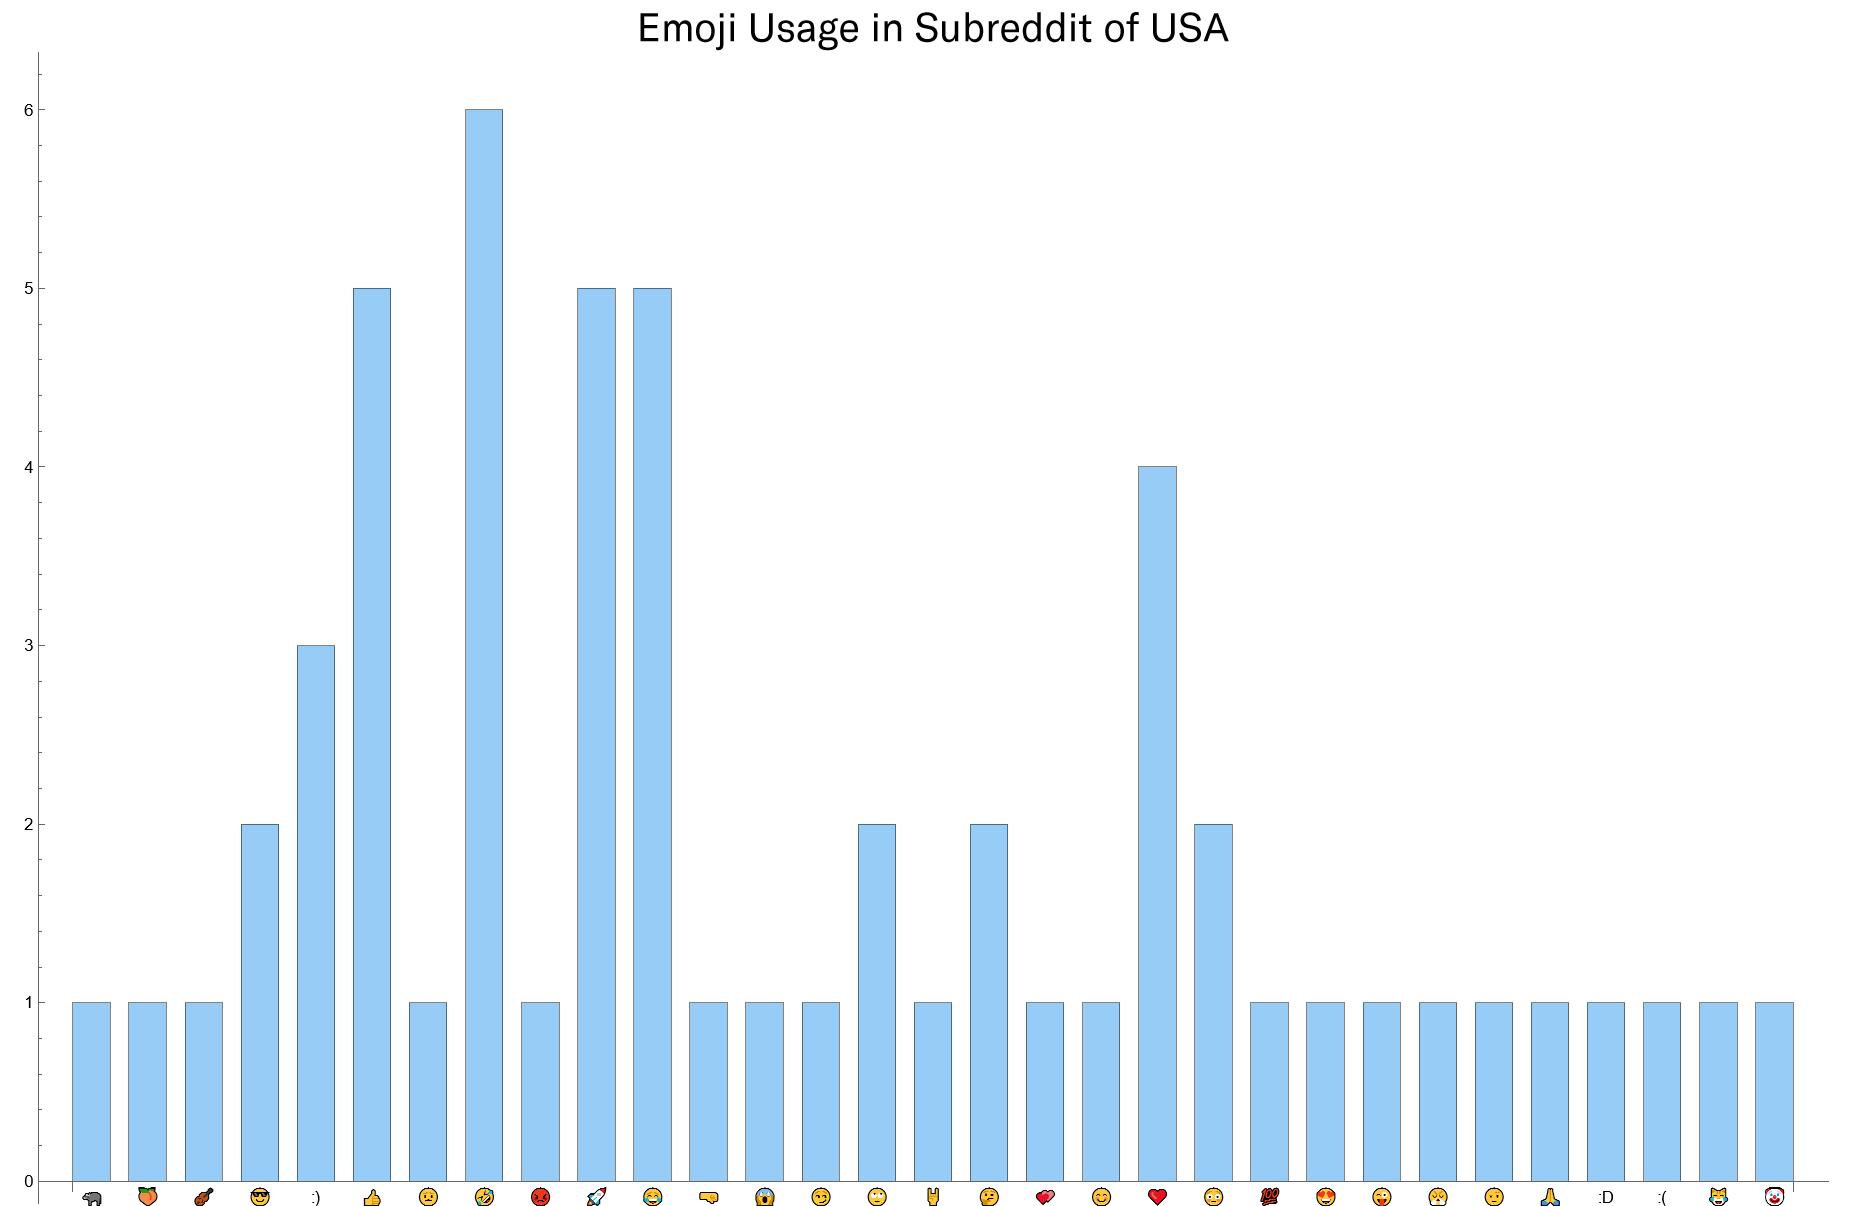 Emoji use in posts and comments extracted from r/USA subreddit